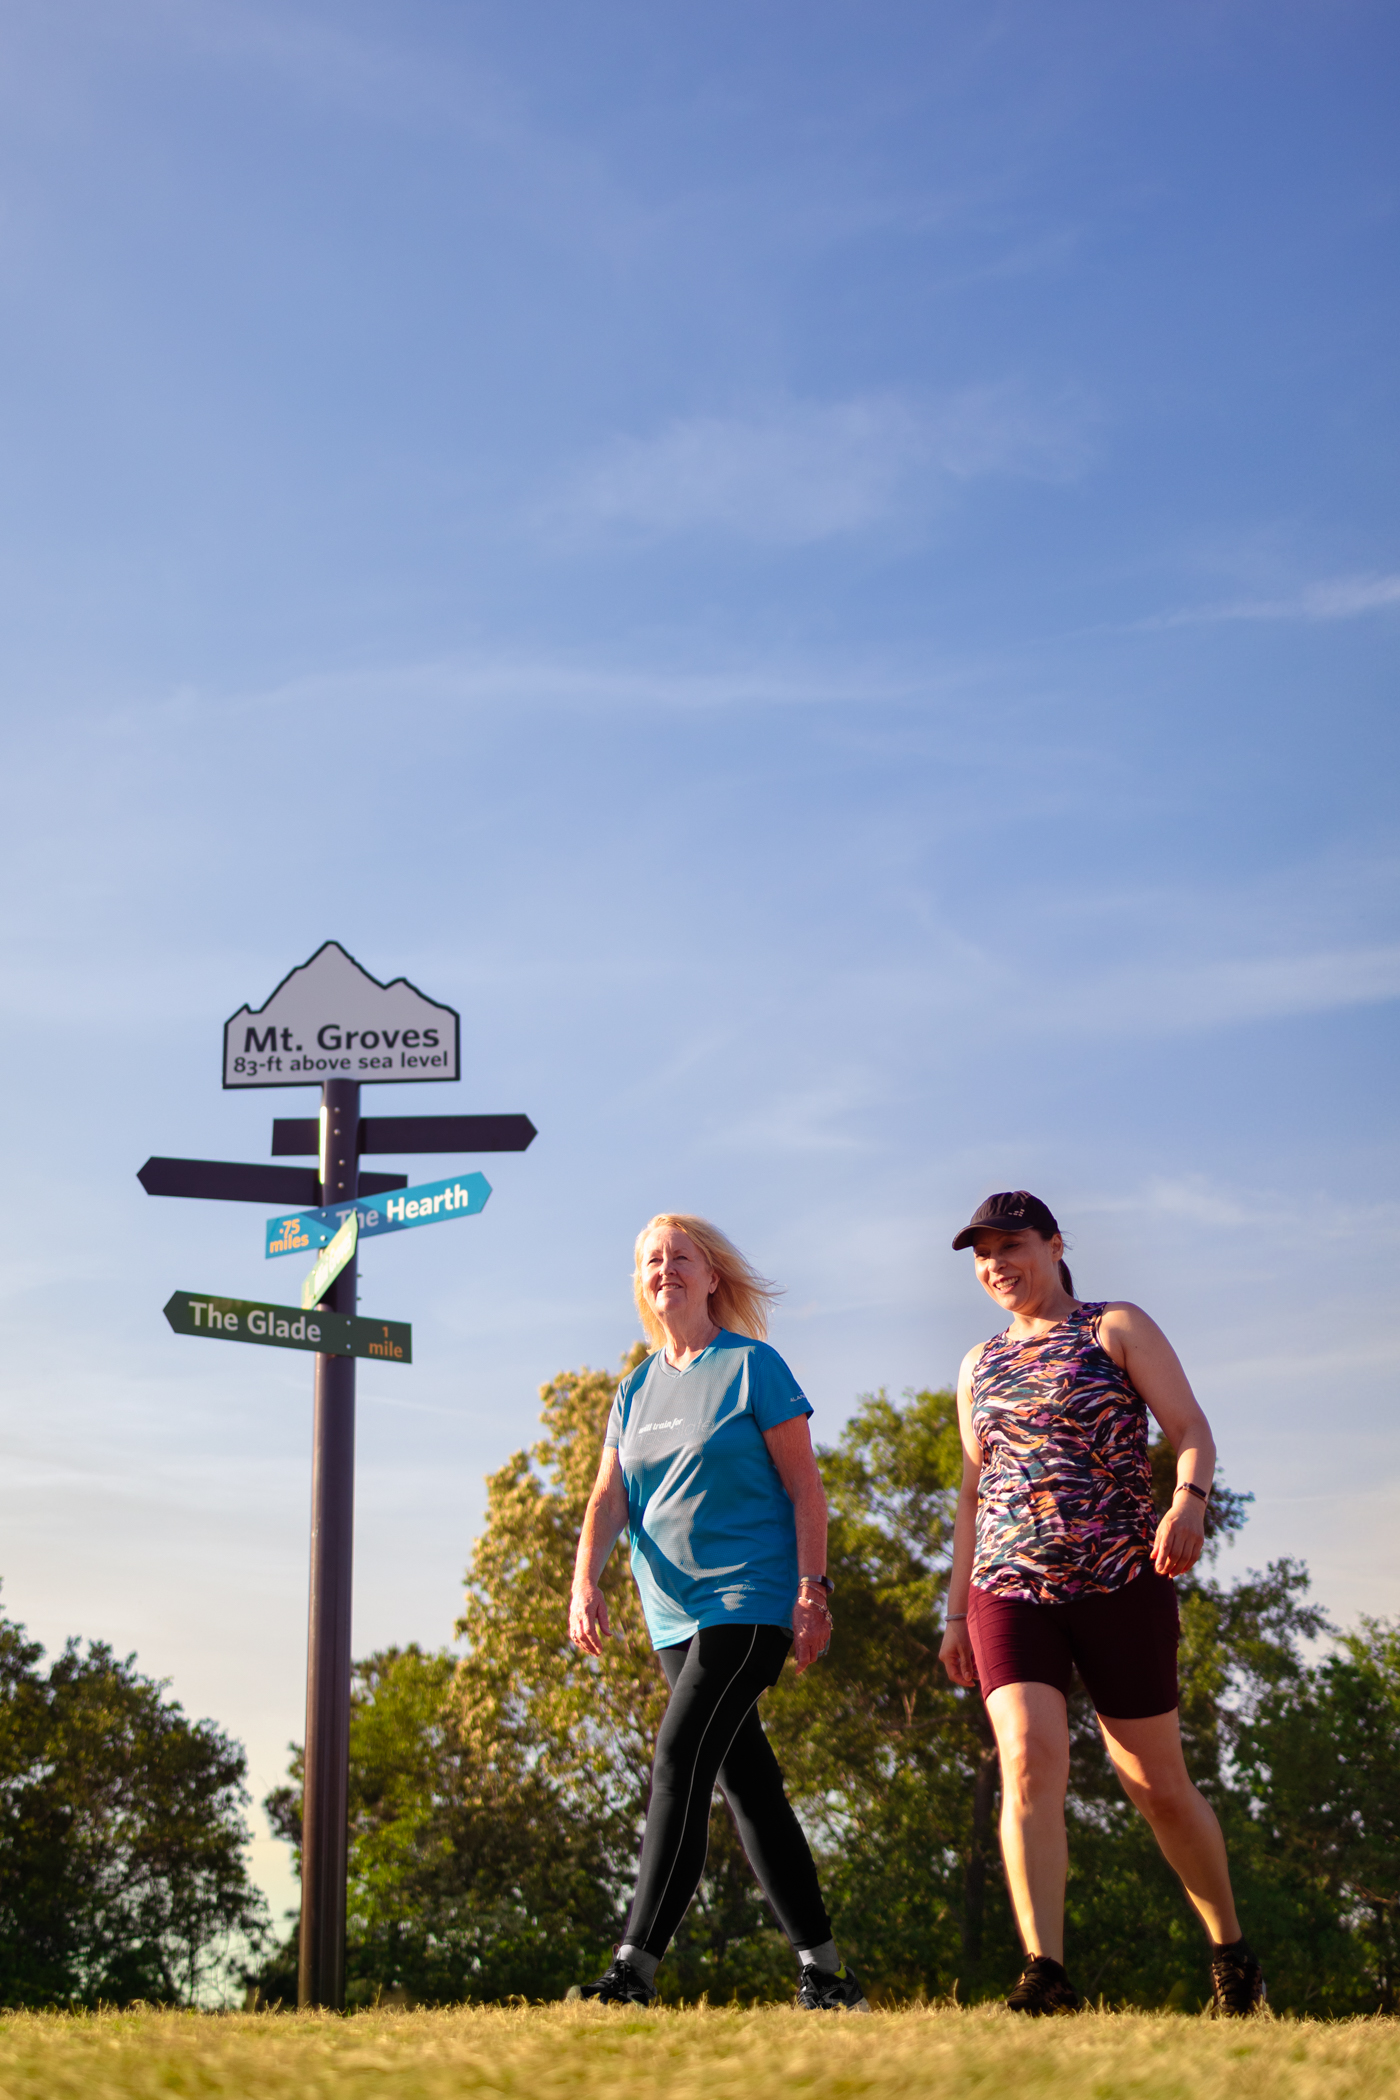 The Groves residents can make their way through Circuit Park, a fitness trail of adventure, right here in our community.